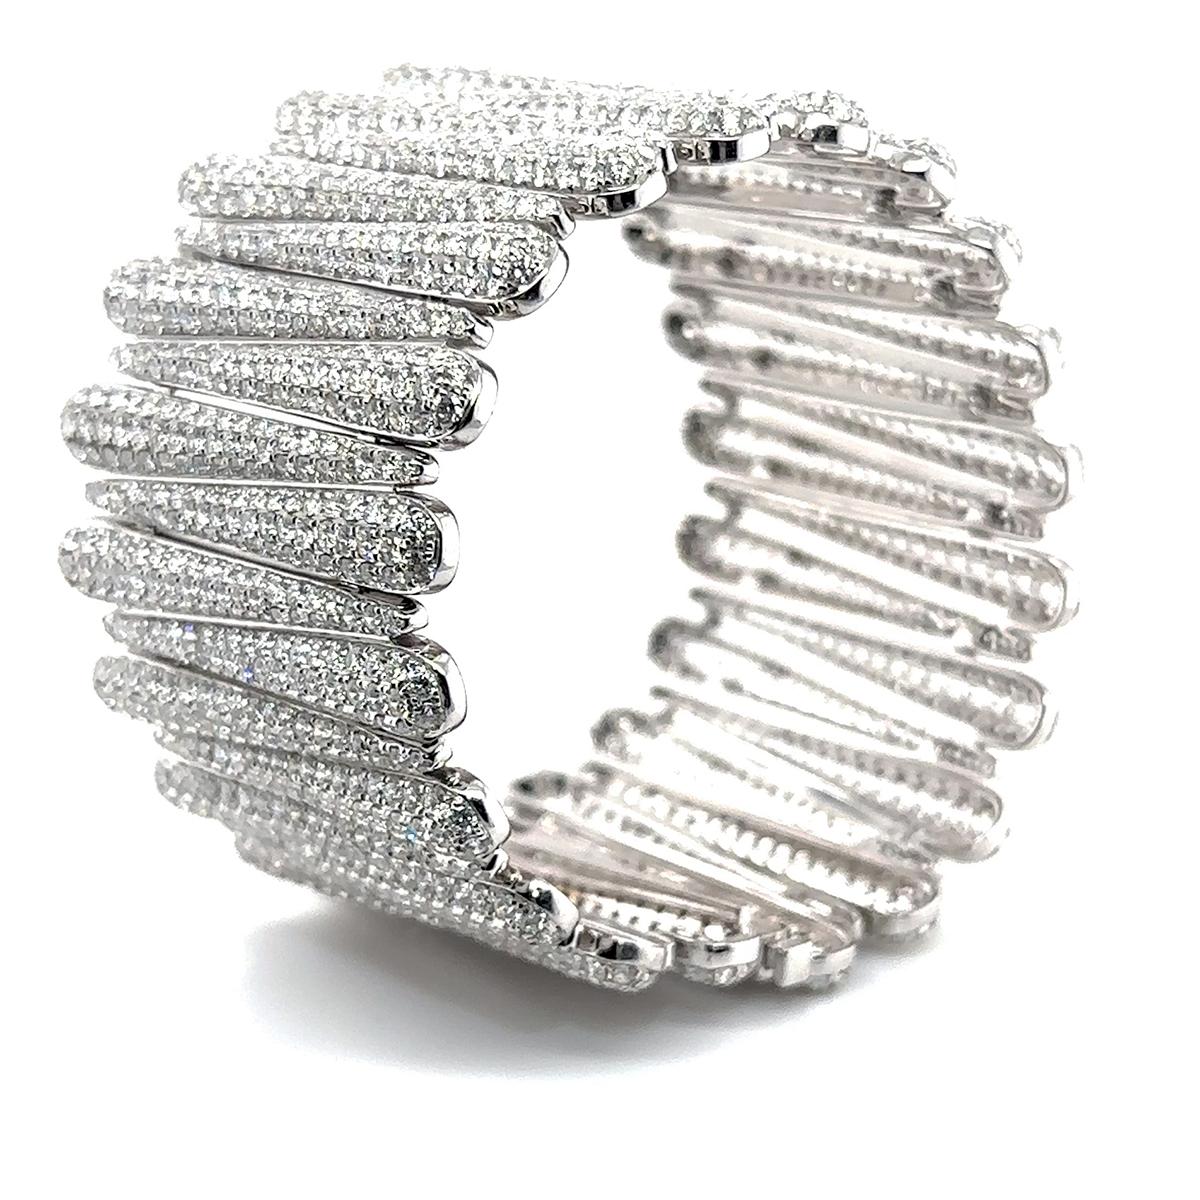 18k White gold bracelet with 1960 pave set round brilliant diamonds weighing 45.06 carats. 95.78 grams